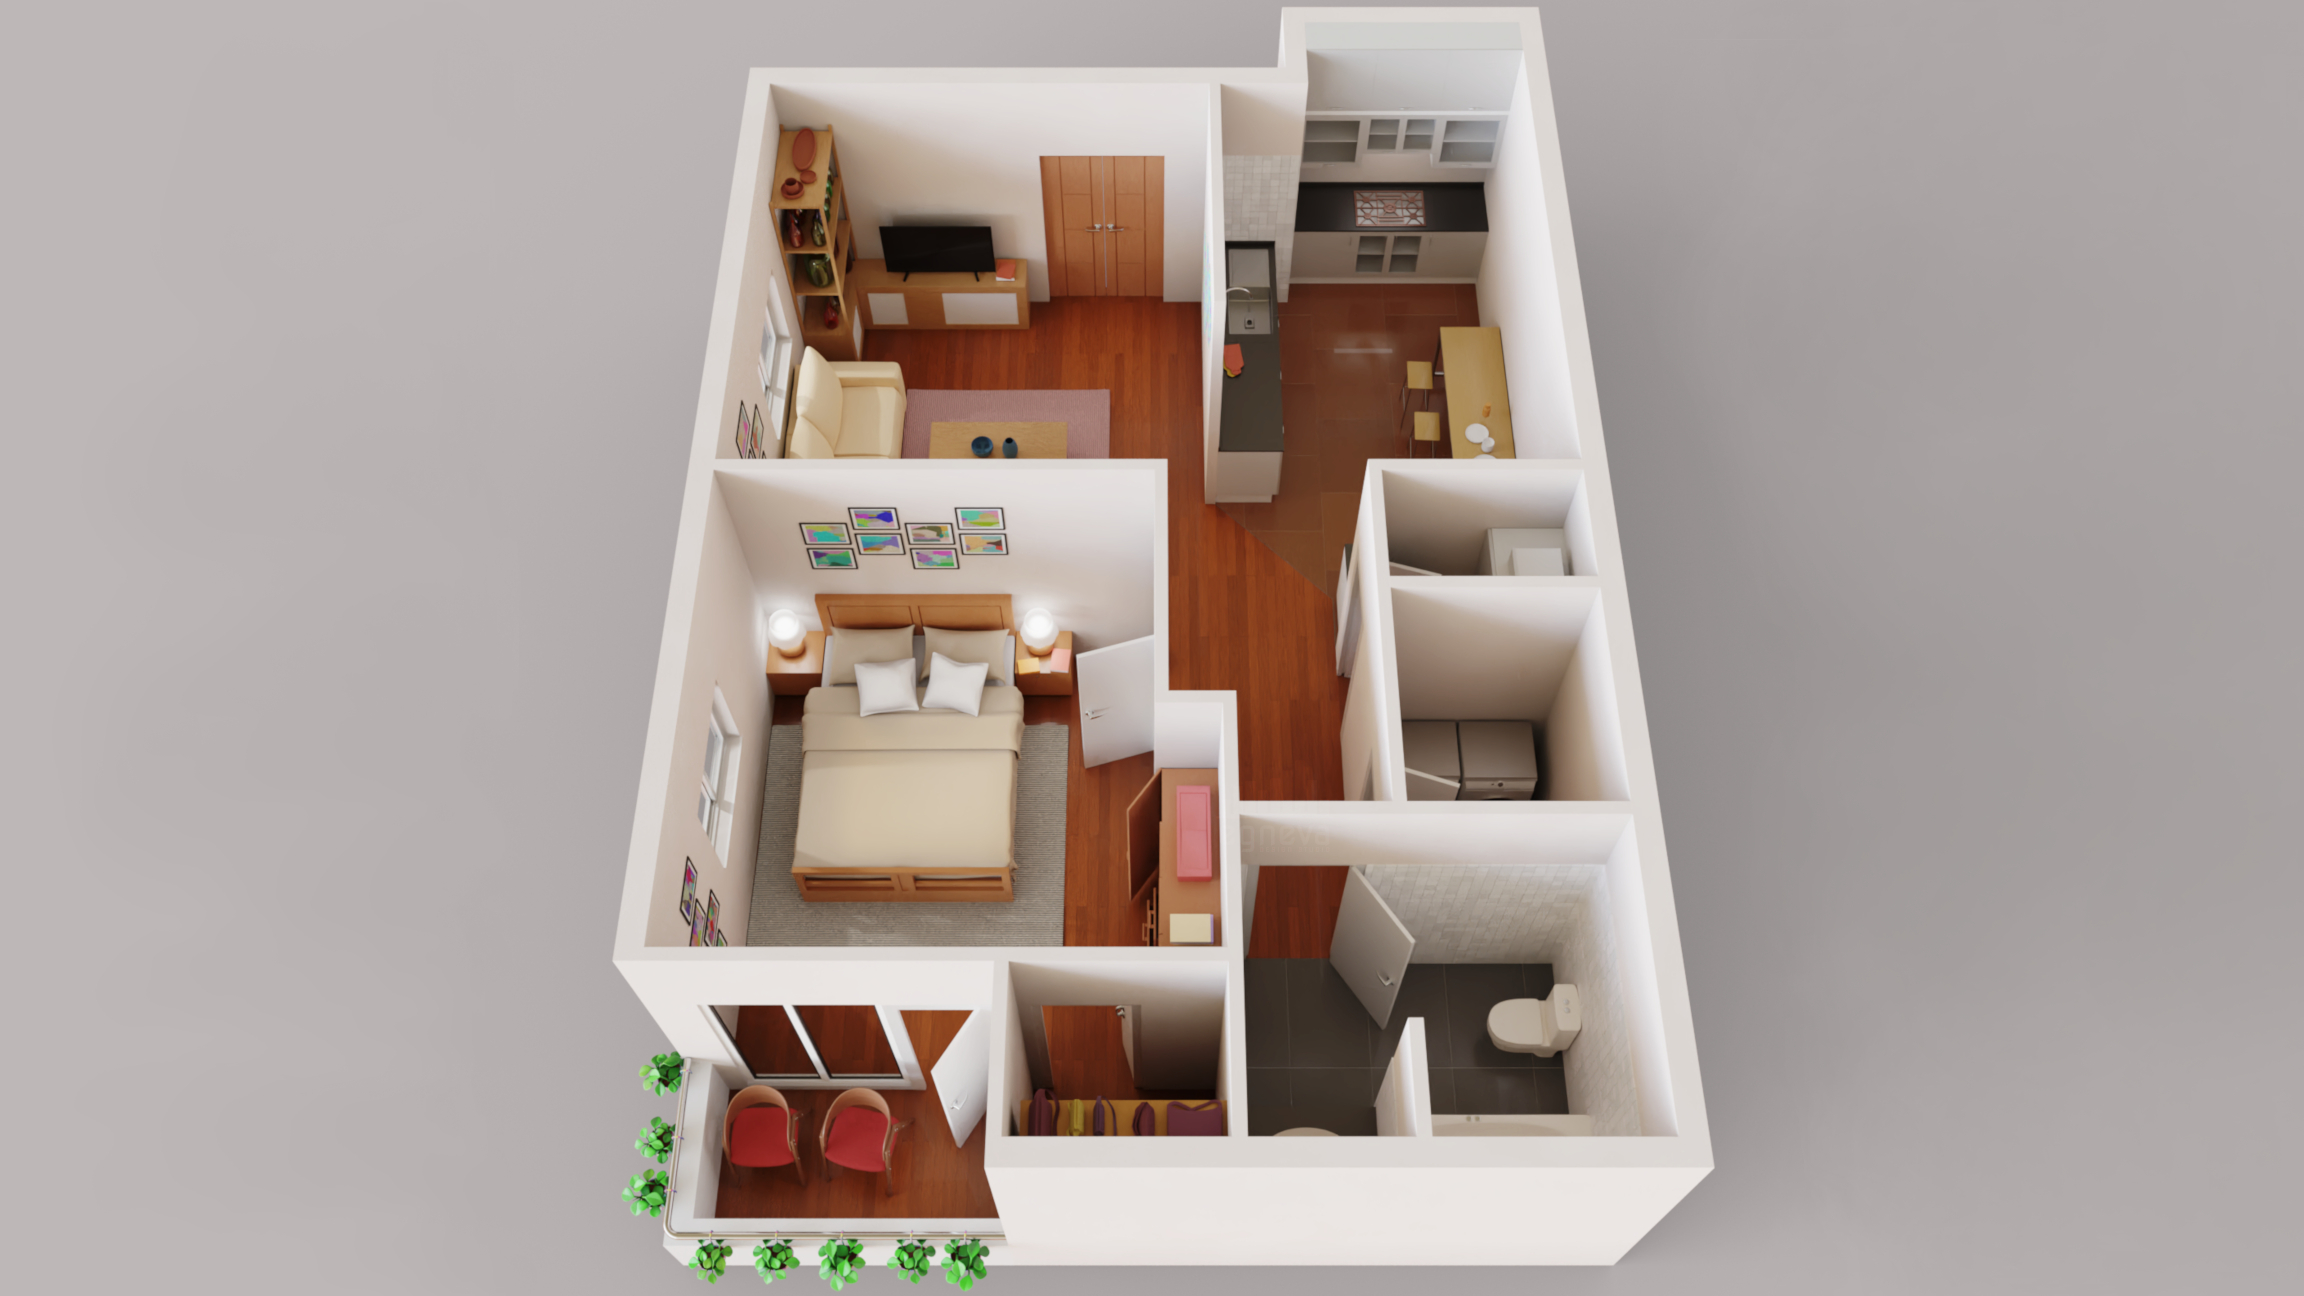 3D Floor Plan for Airbnb property based on hand sketch on Behance